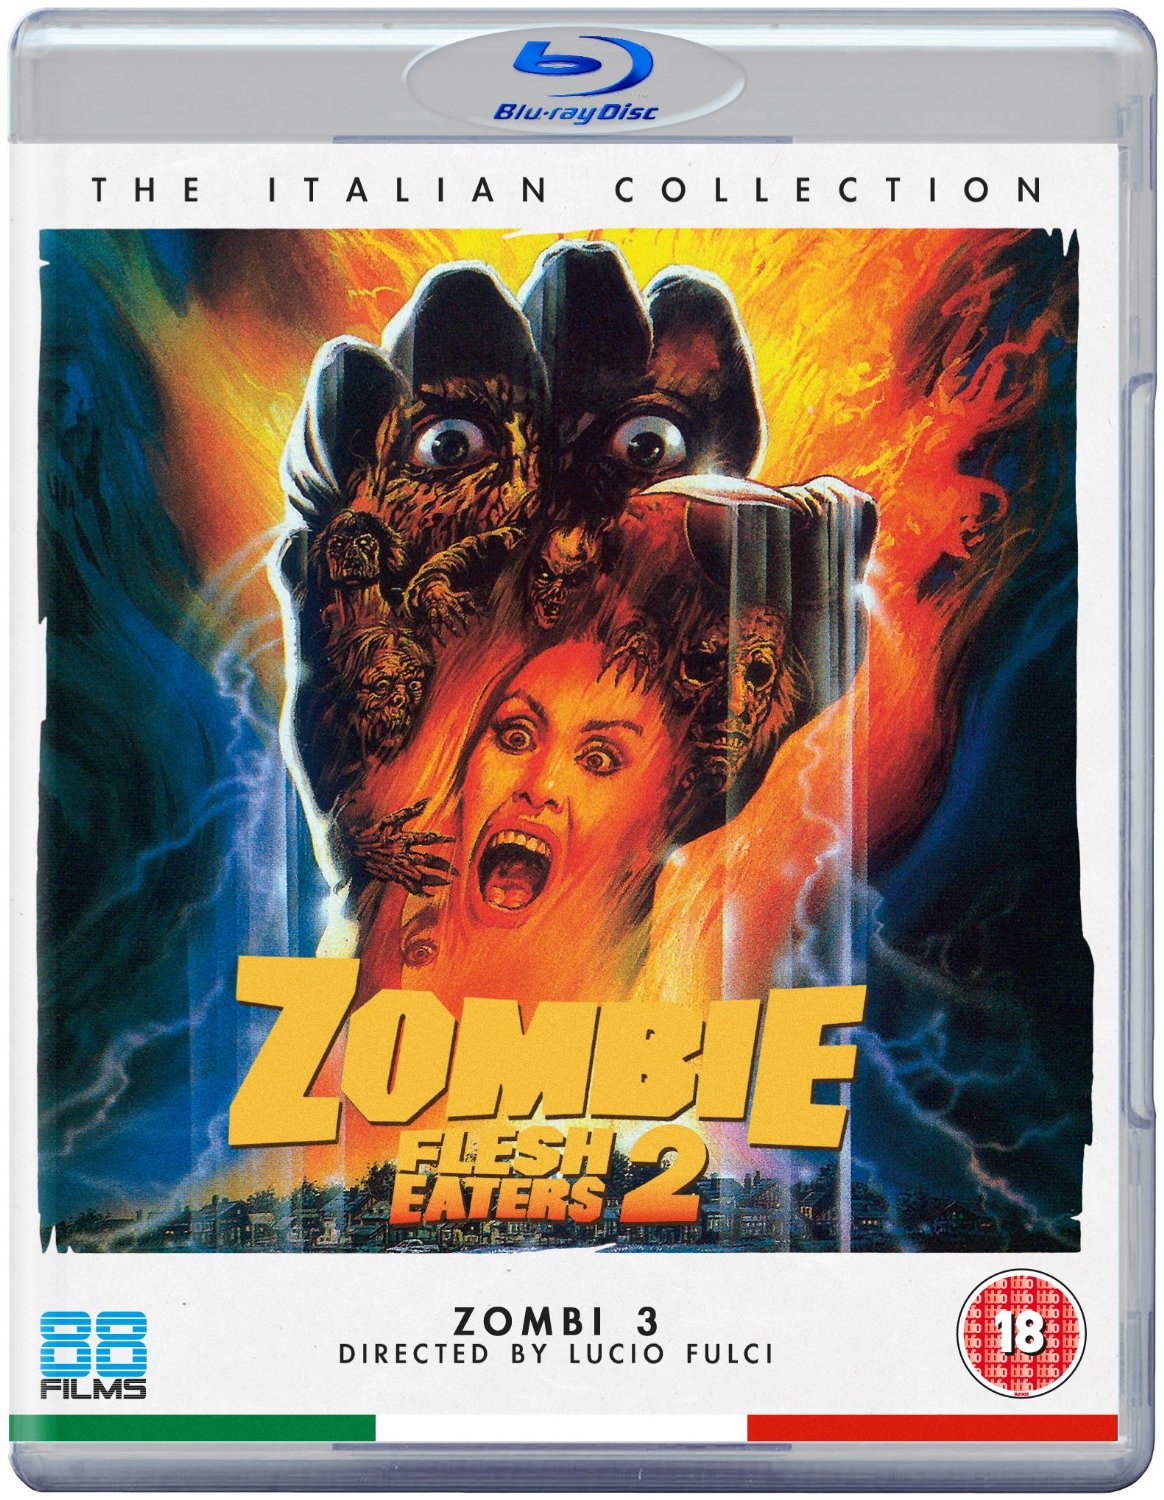 Zombie Flesh Eaters 2 Blu-ray review: Fulci’s finest?